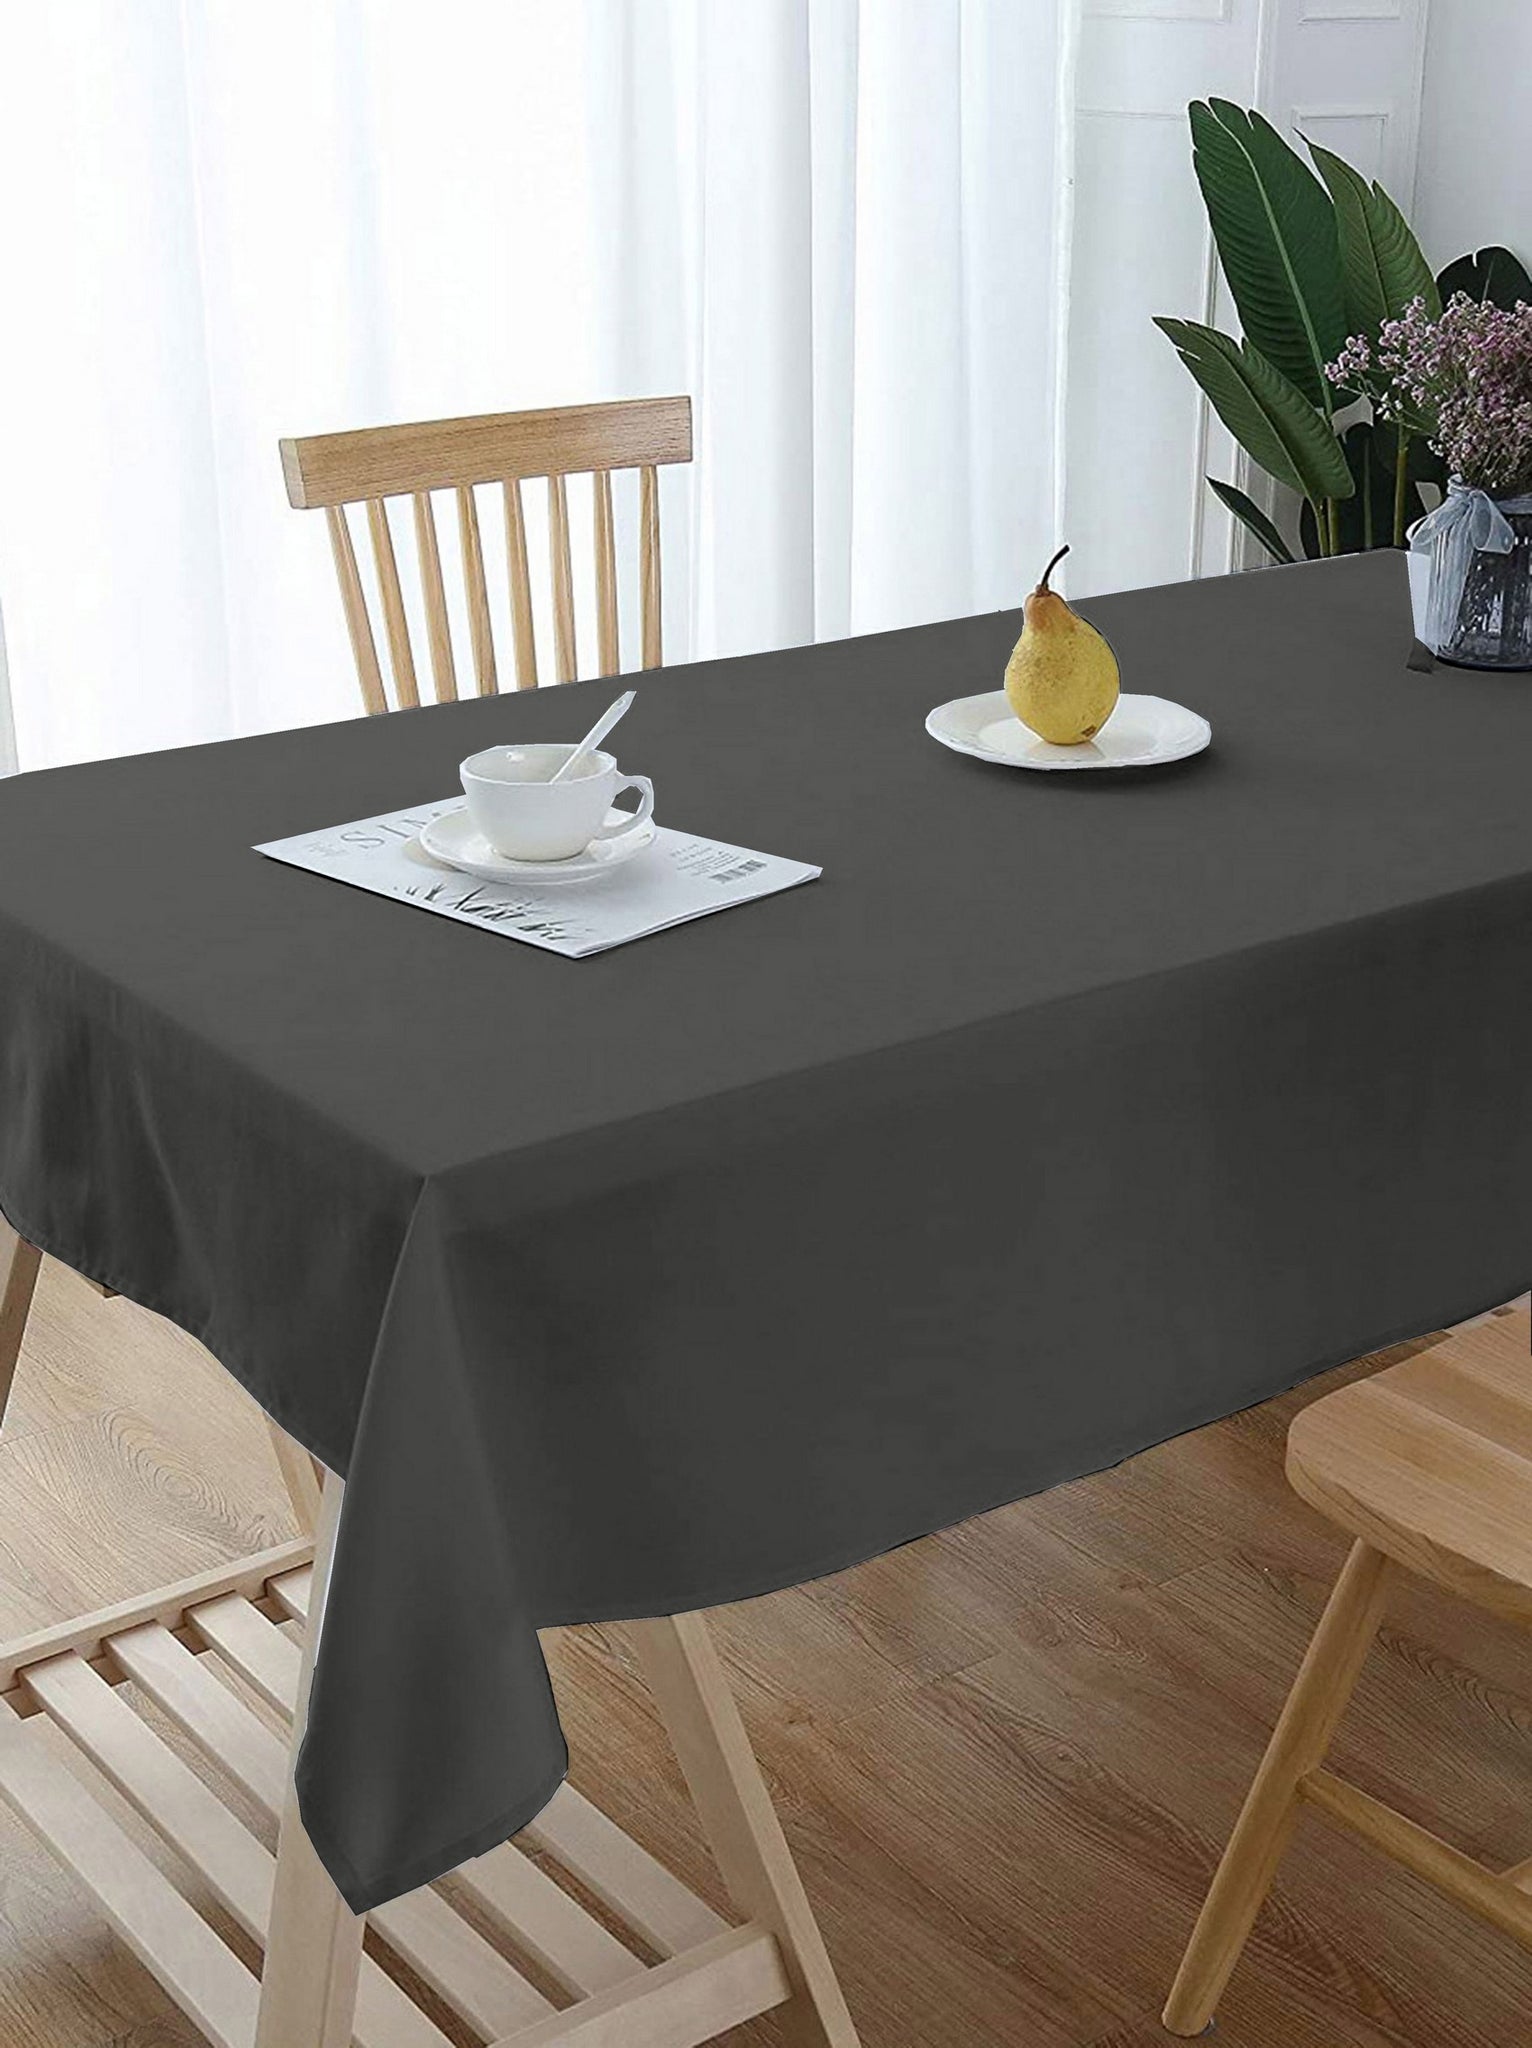 Lushomes center table cover, Dark Grey, Classic Plain Dining Table Cover Cloth (Size 36 x 60”, Center Table Cloth)